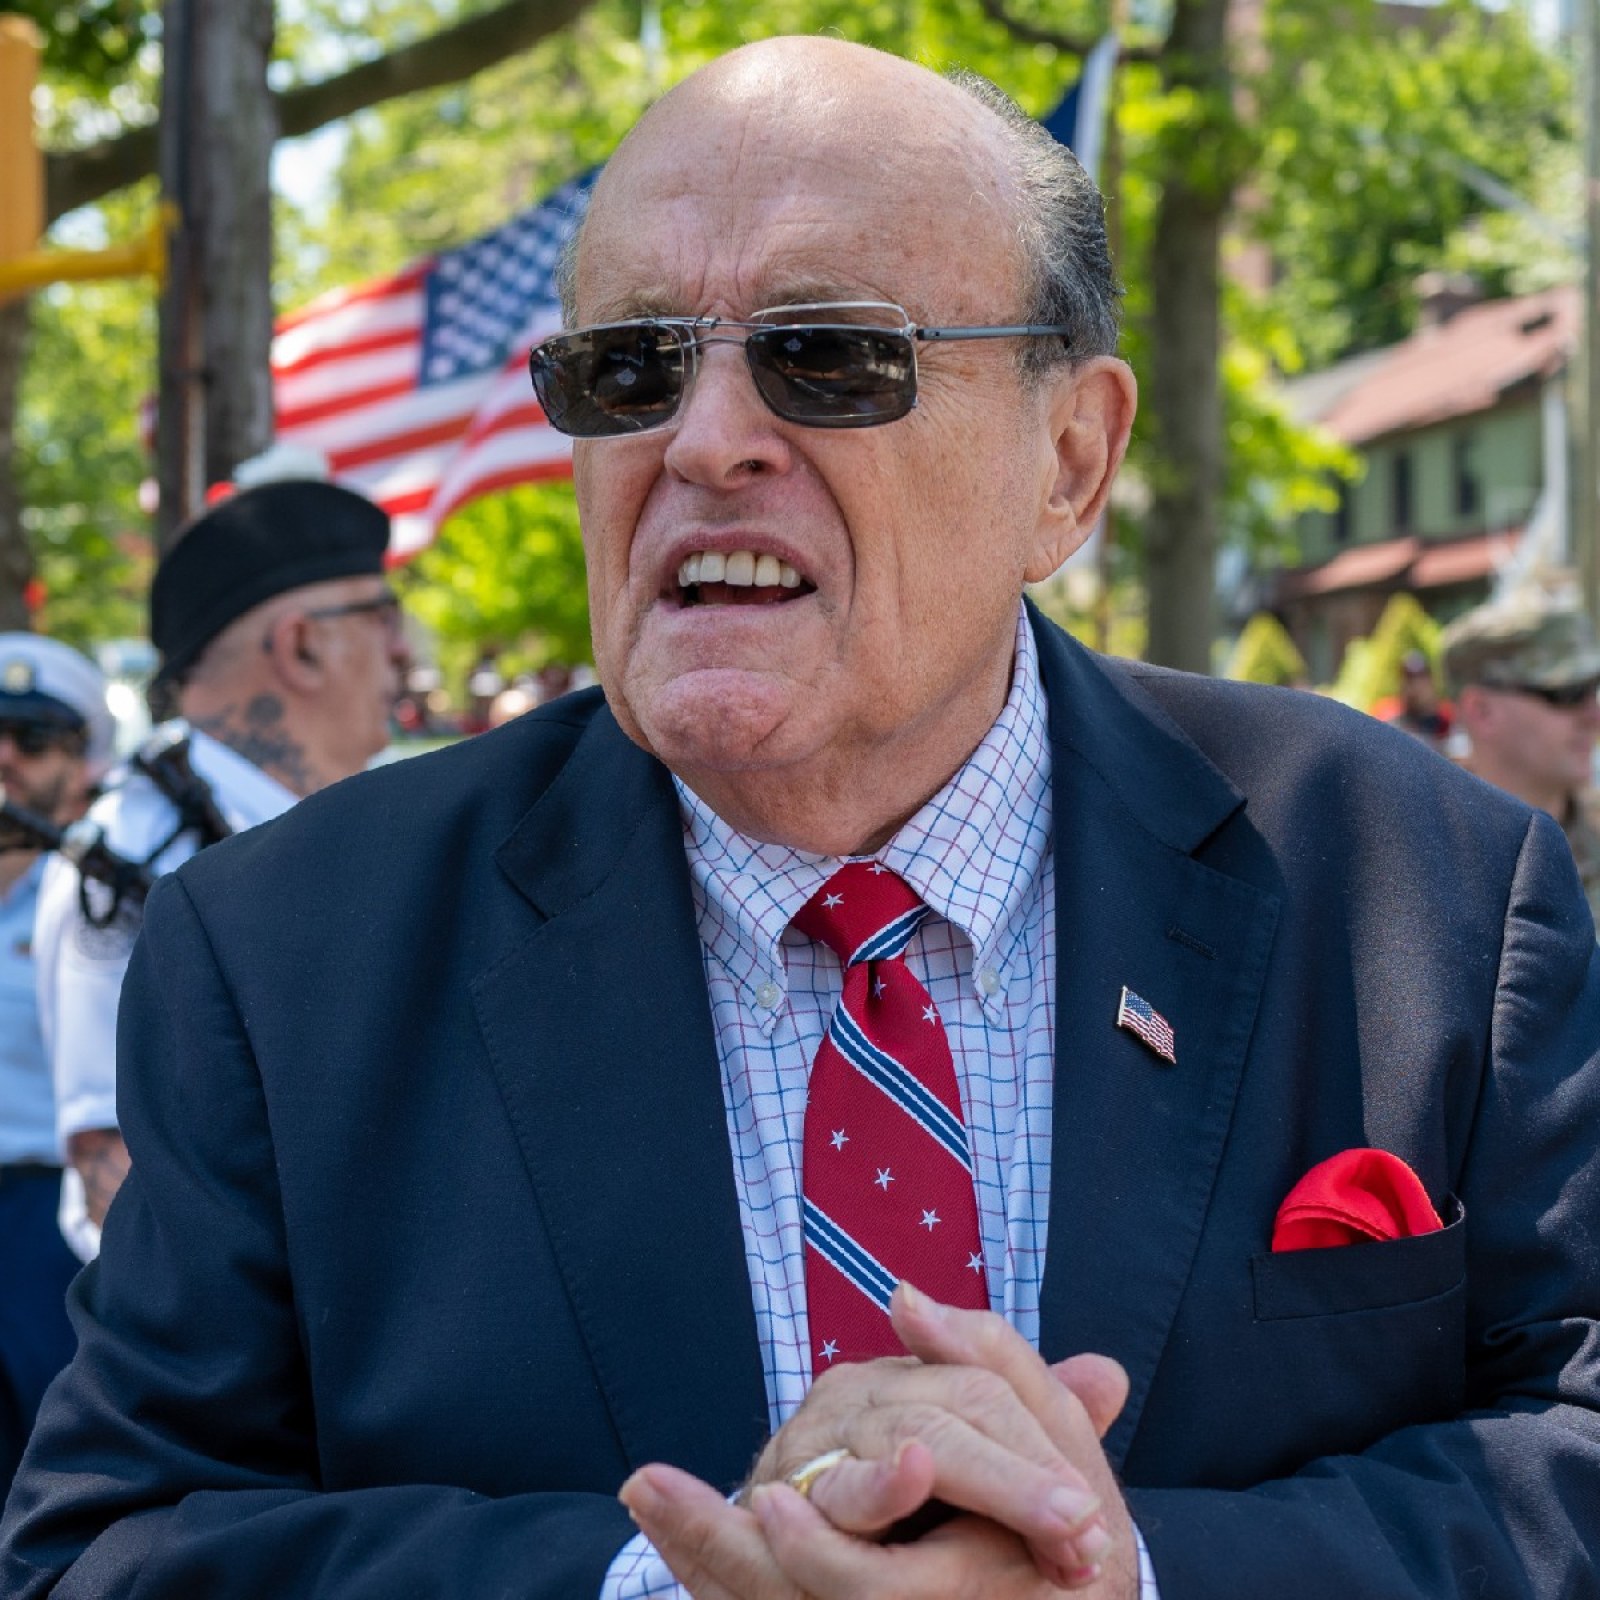 Video of Rudy Giuliani Slapped Inside Grocery Store Viewed 2M Times